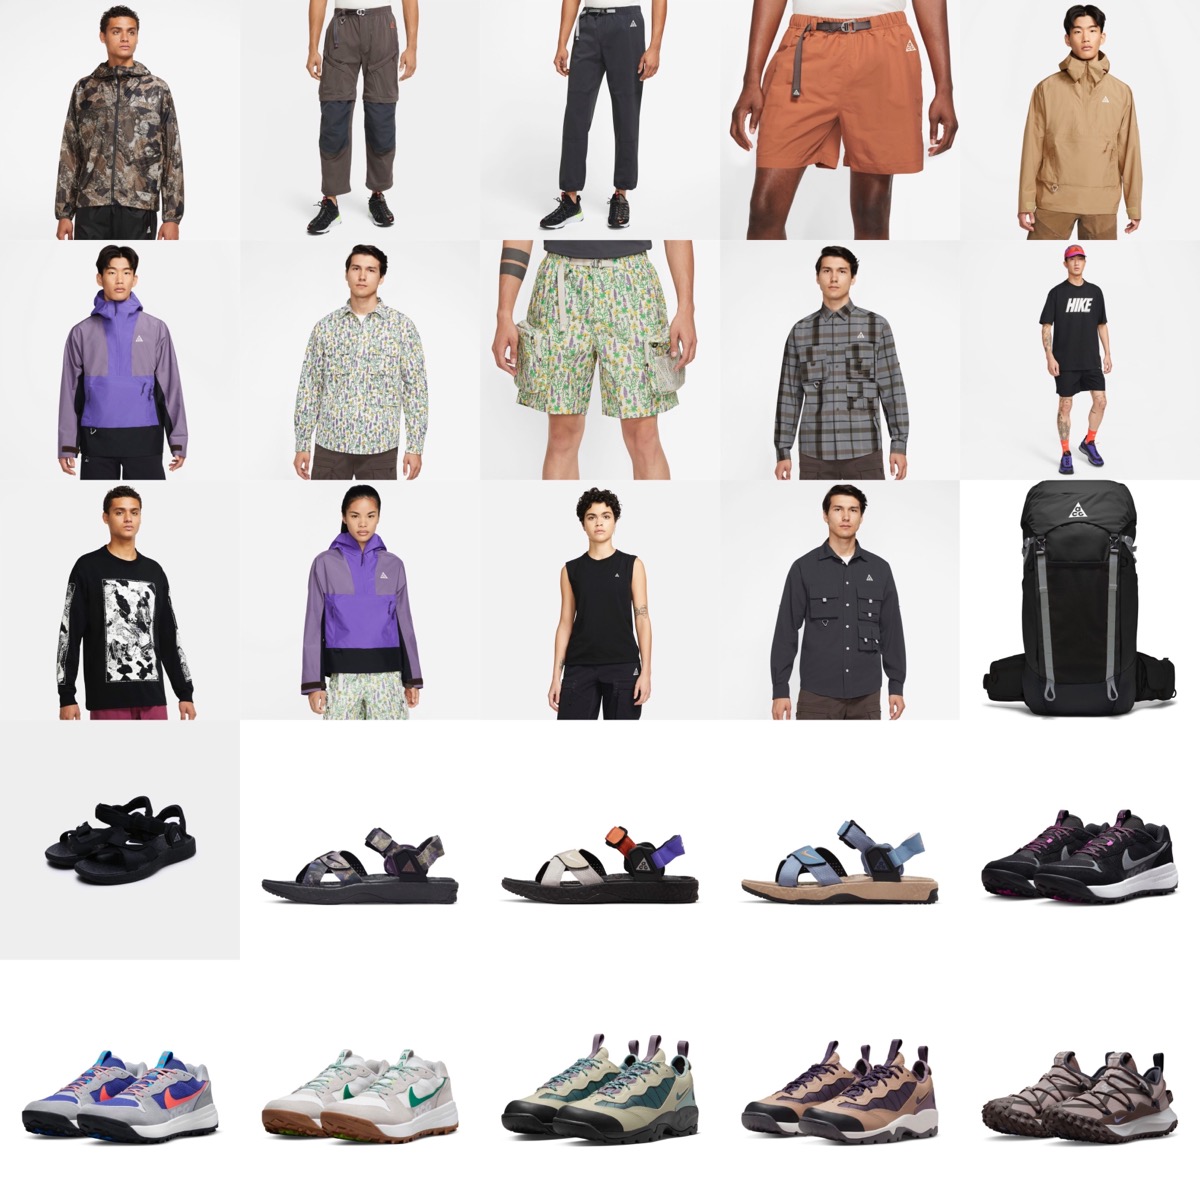 Nike ACG】2022 Summer Collectionが国内5月2日に発売予定 | UP TO DATE